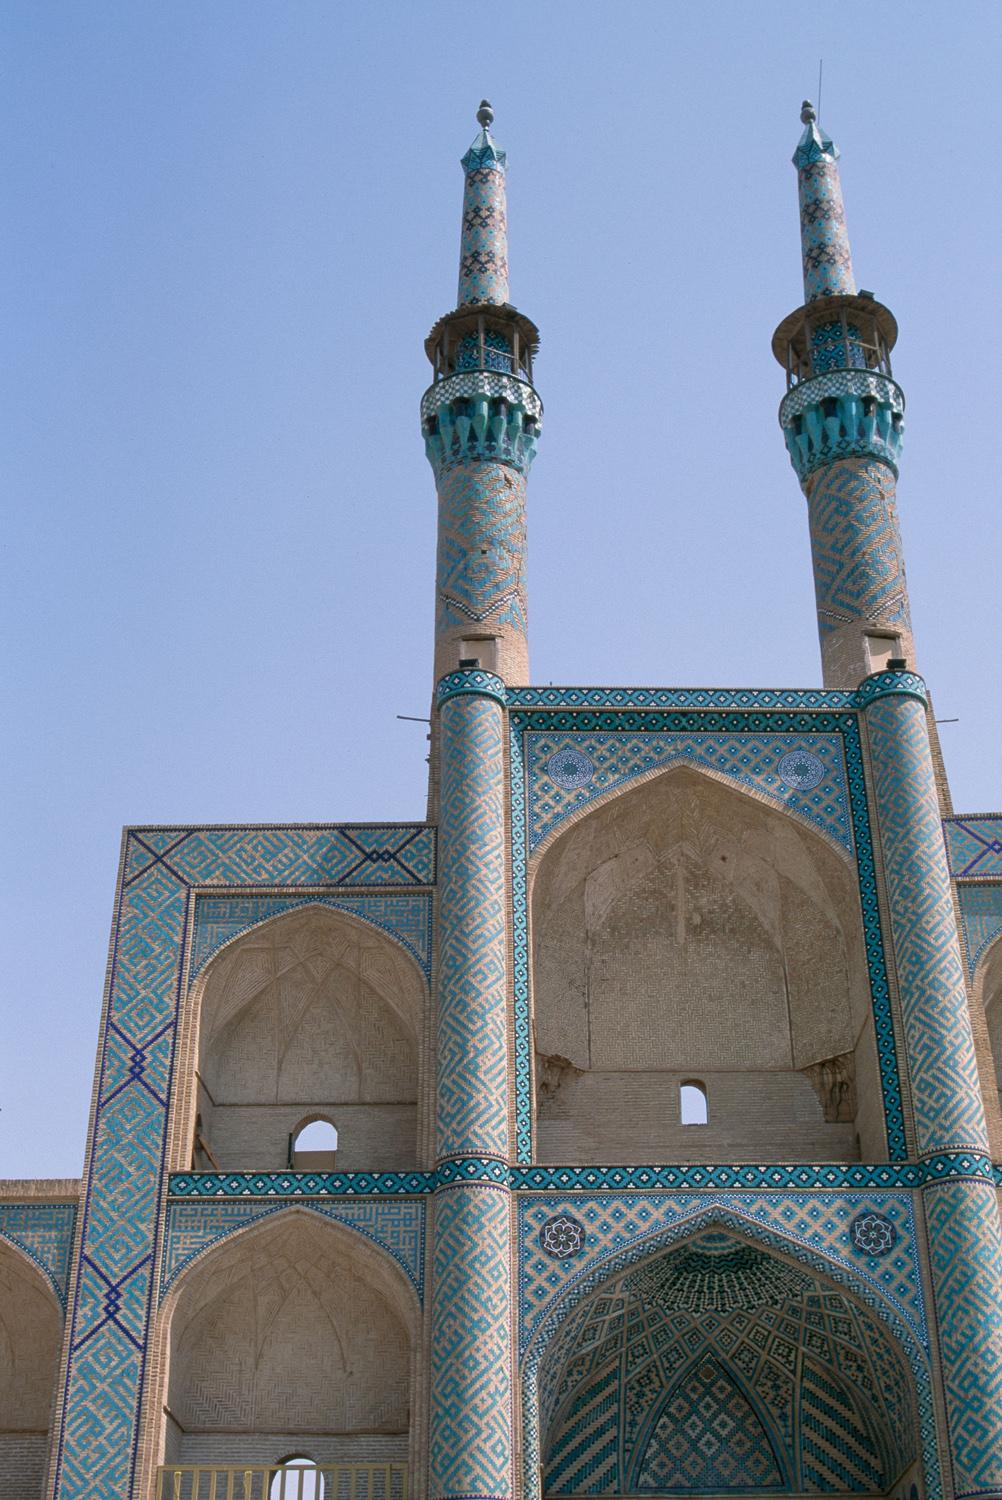 Detail view with minarets